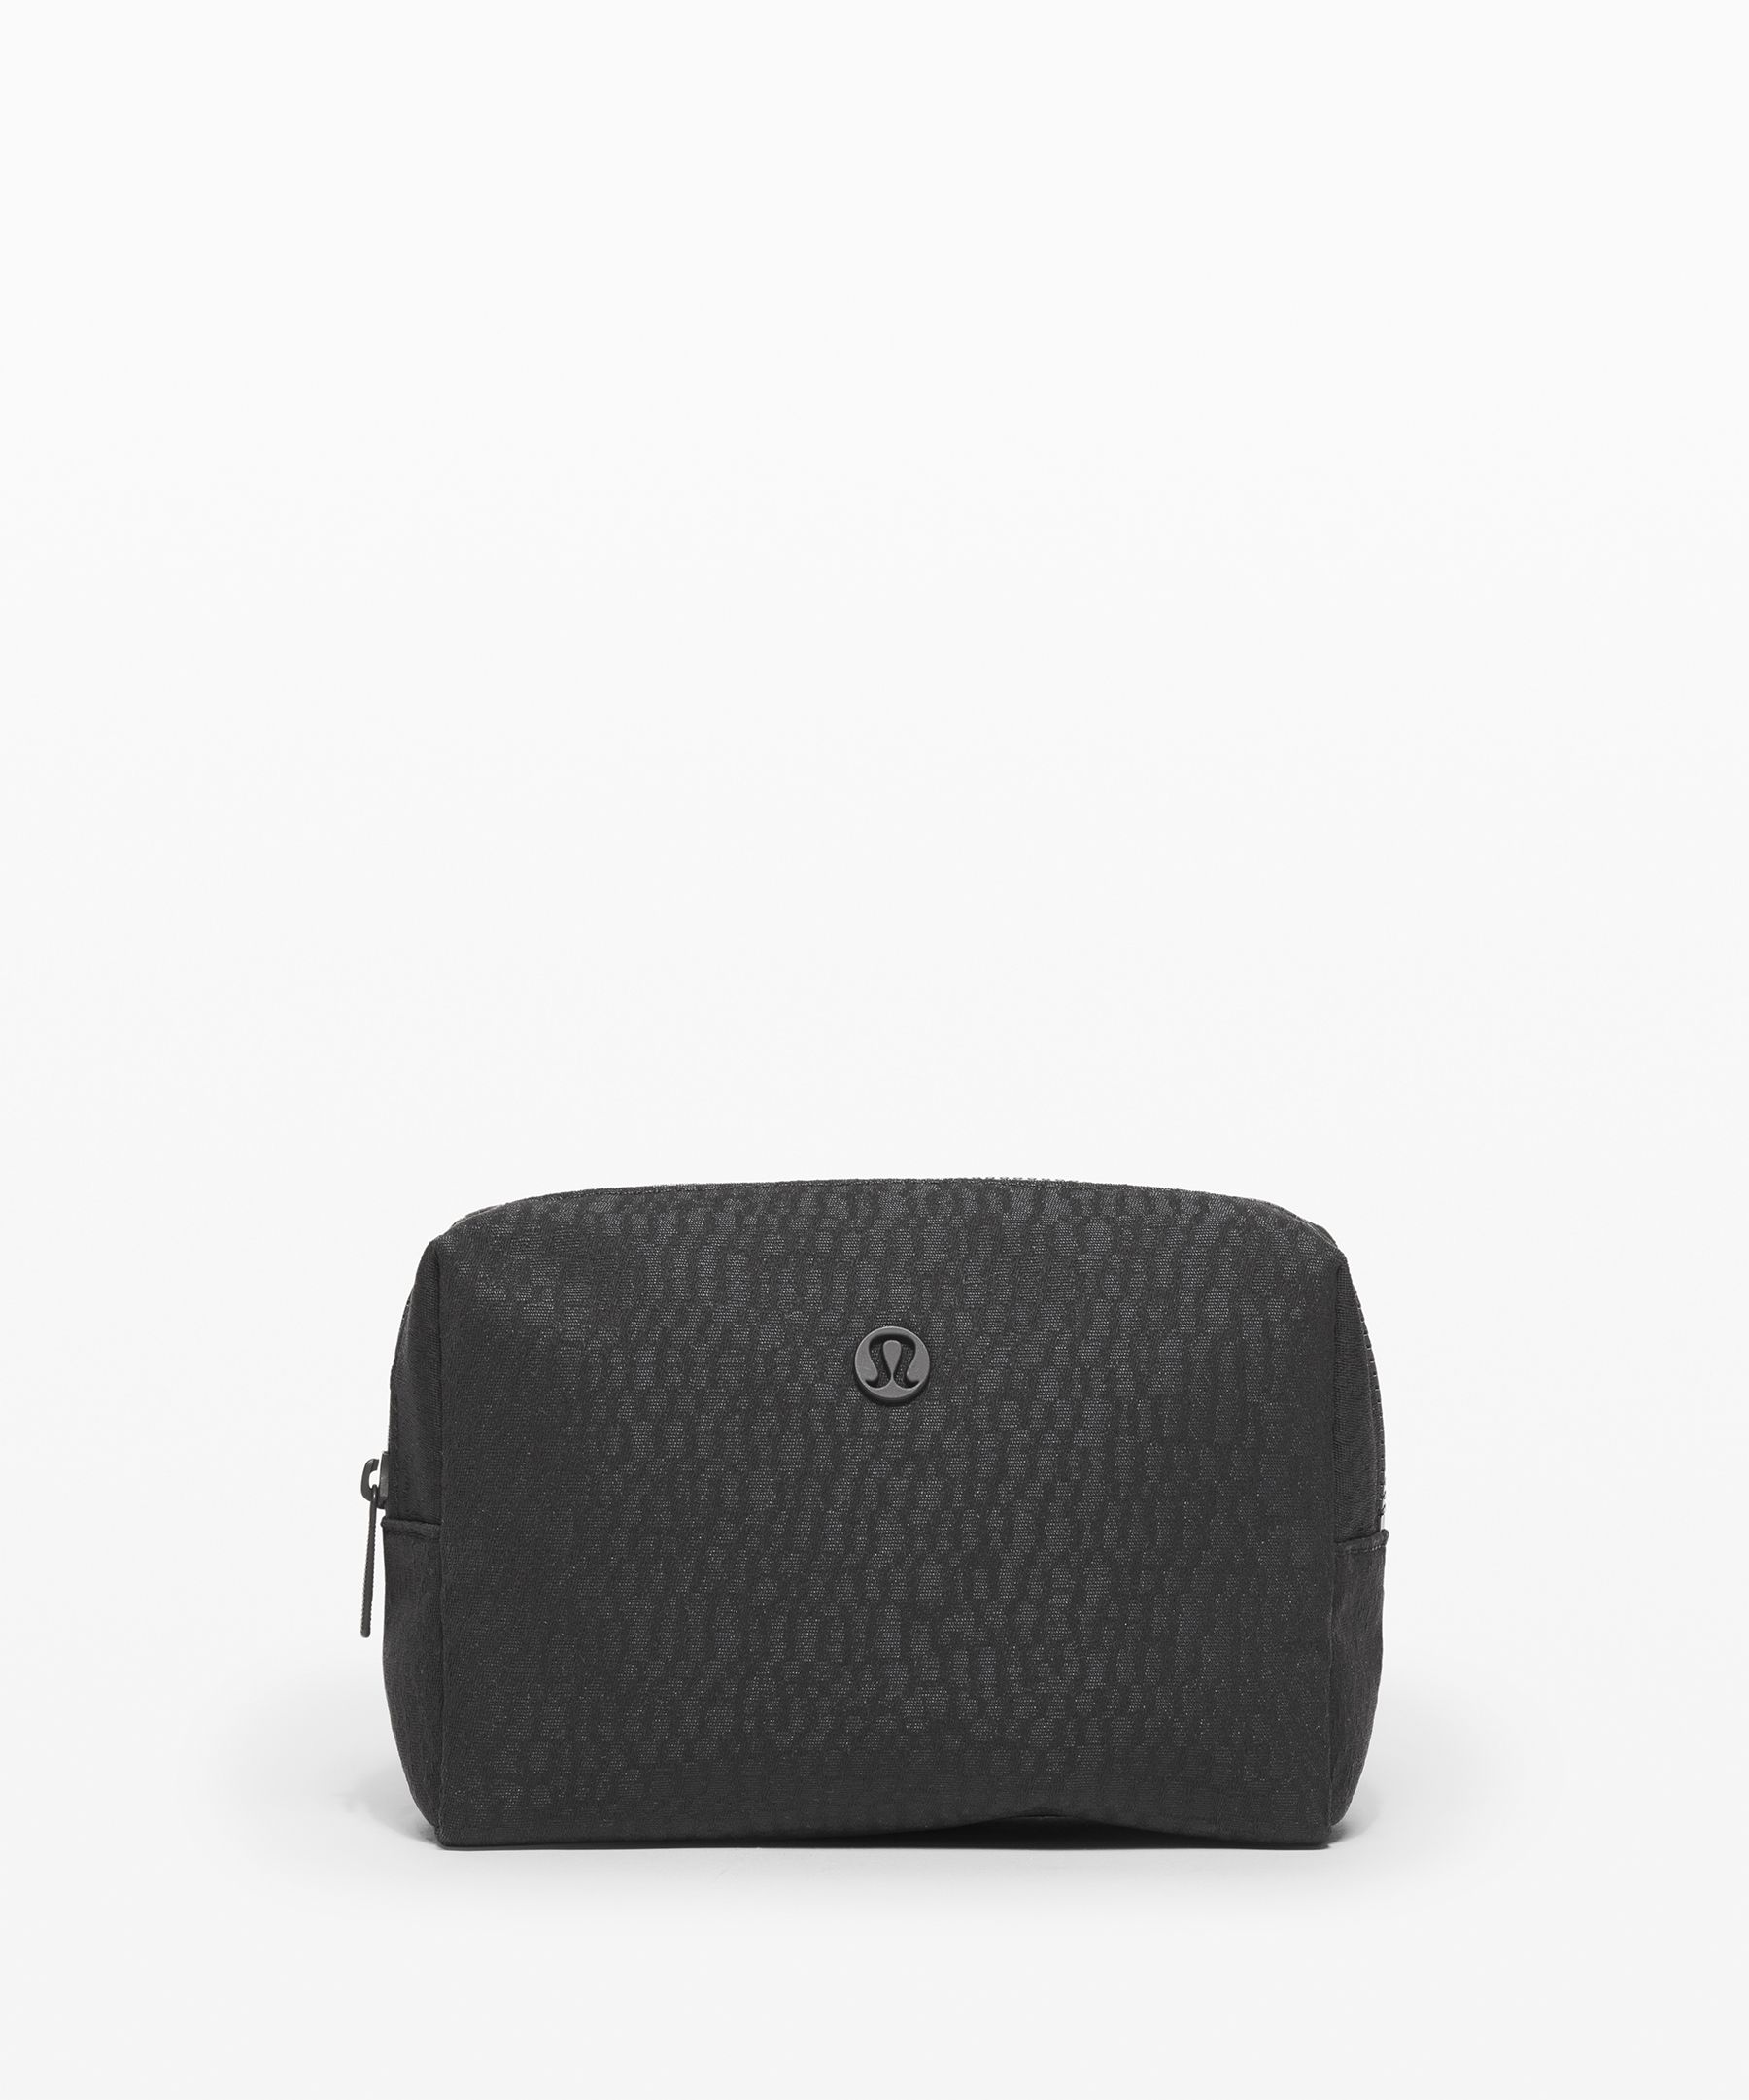 Lululemon All Your Small Things Pouch *2l Mini In Stacked Jacquard Black Midnight